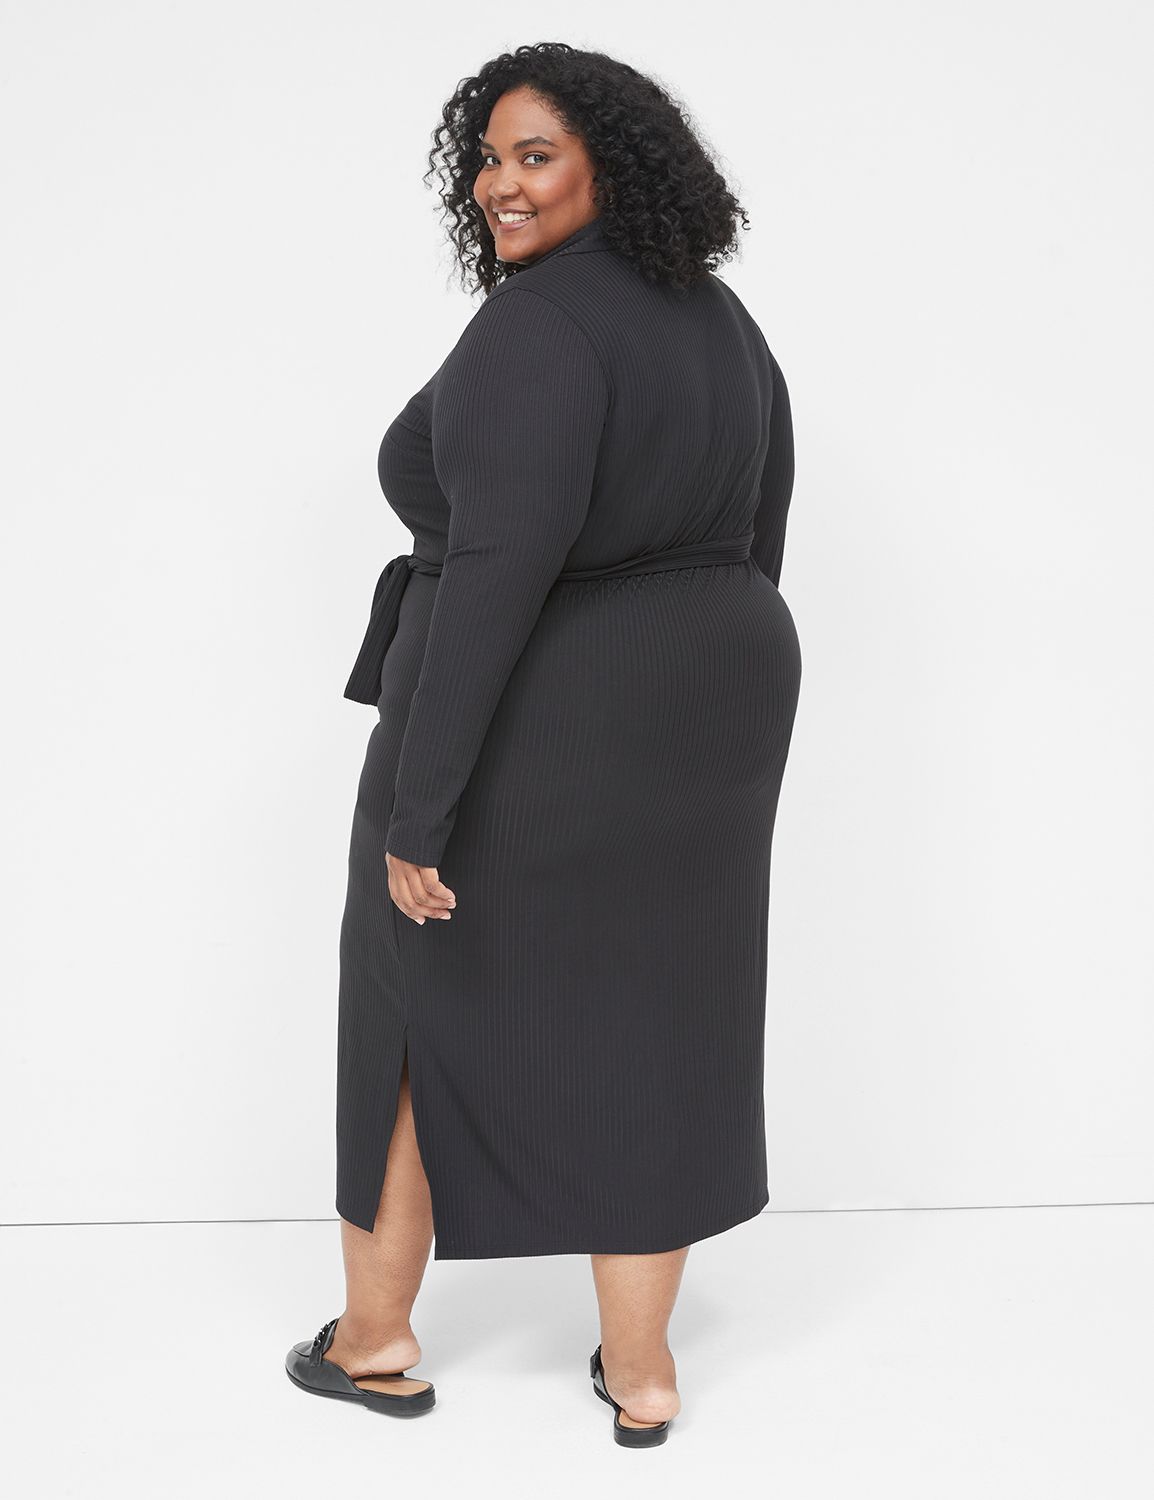 Black of Friday Deals 2023 Dollar Items Deals Under 10 Dollars Sexy Dresses  for Women Date Night Plus Size Off Shoulder Long Sleeve Midi Dress  Valentines Day Gifts for Her Cocktail at